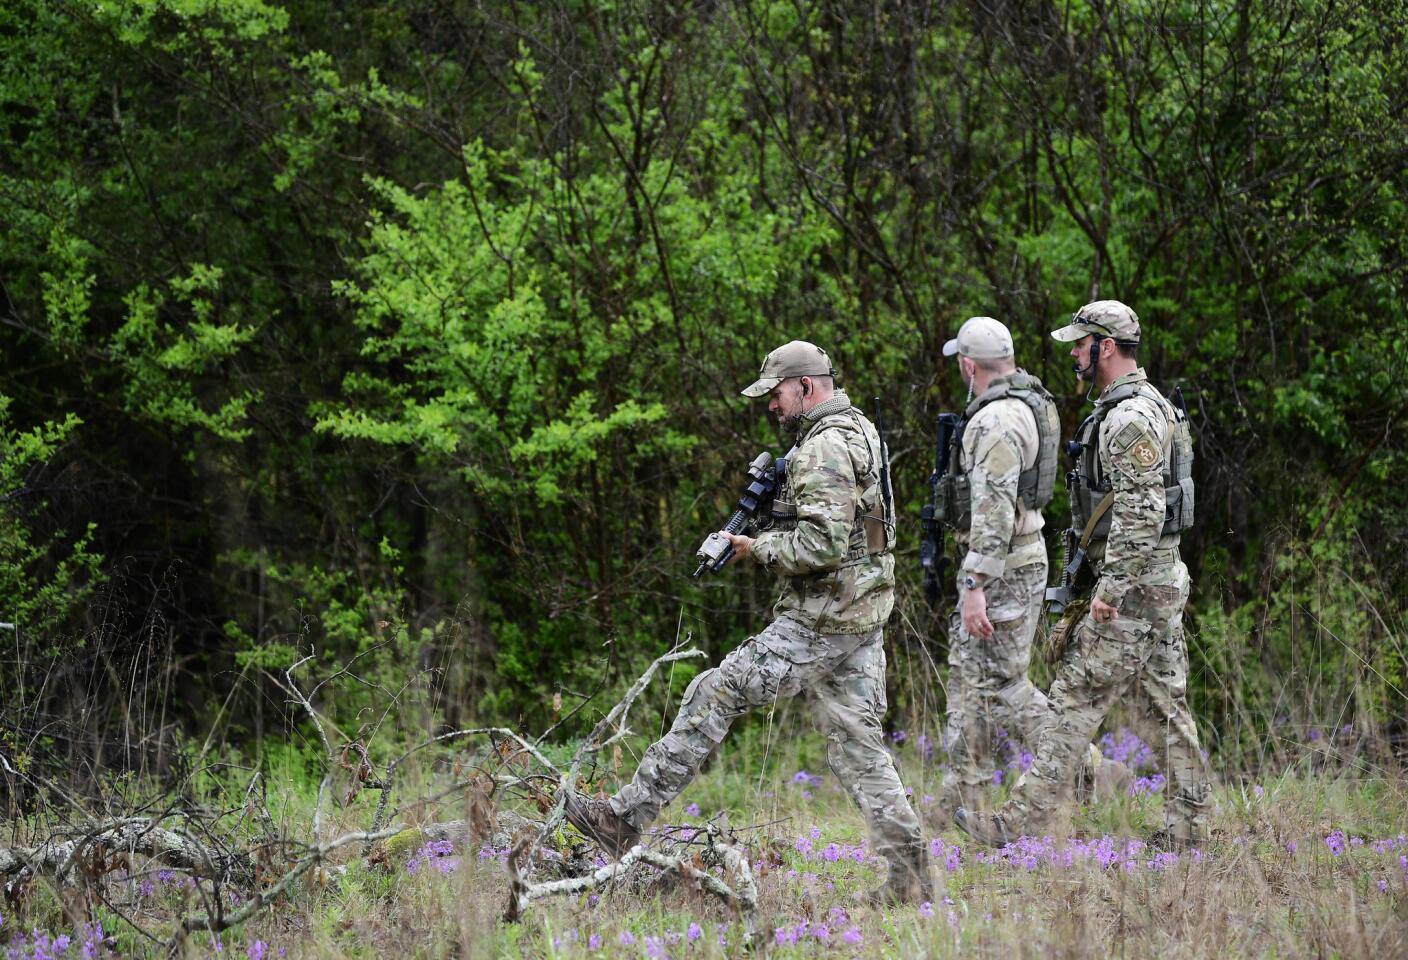 Bureau of Alcohol, Tobacco, Firearms and Explosives personnel search a wooded area Monday for the suspect who shot and killed several people in a nearby Waffle House in Nashville.